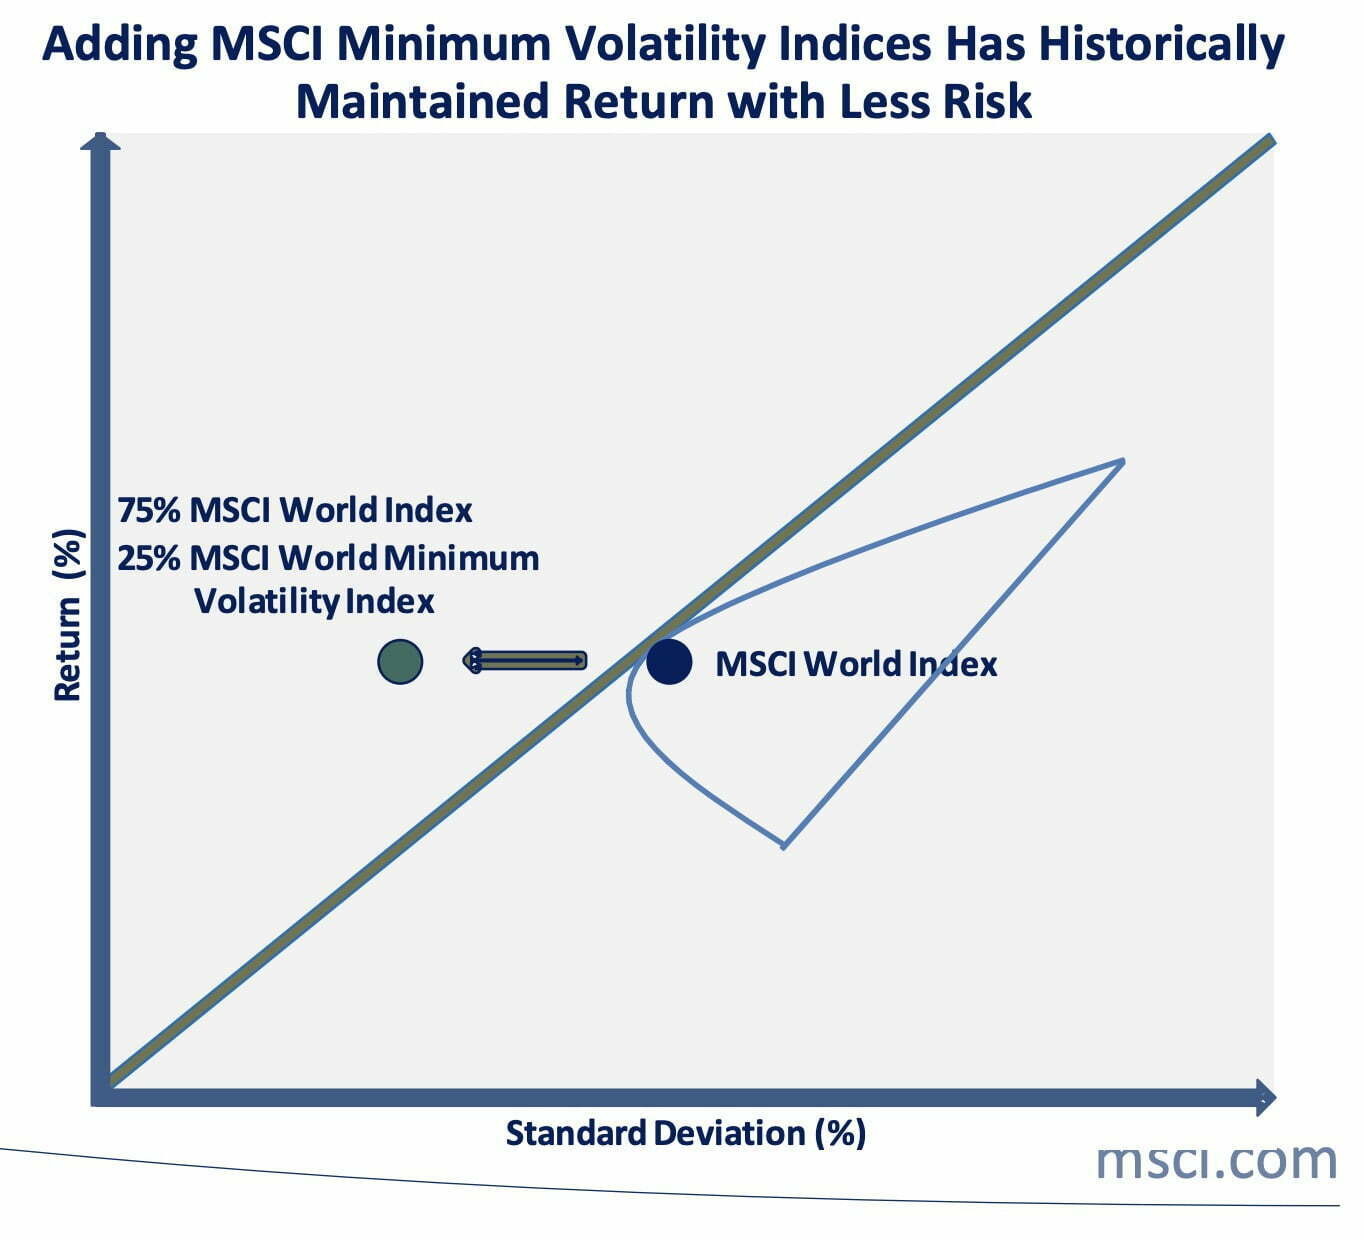 Adding MSCI Minimum Volatility Indices Has Historically Maintained Return with Less Risk 